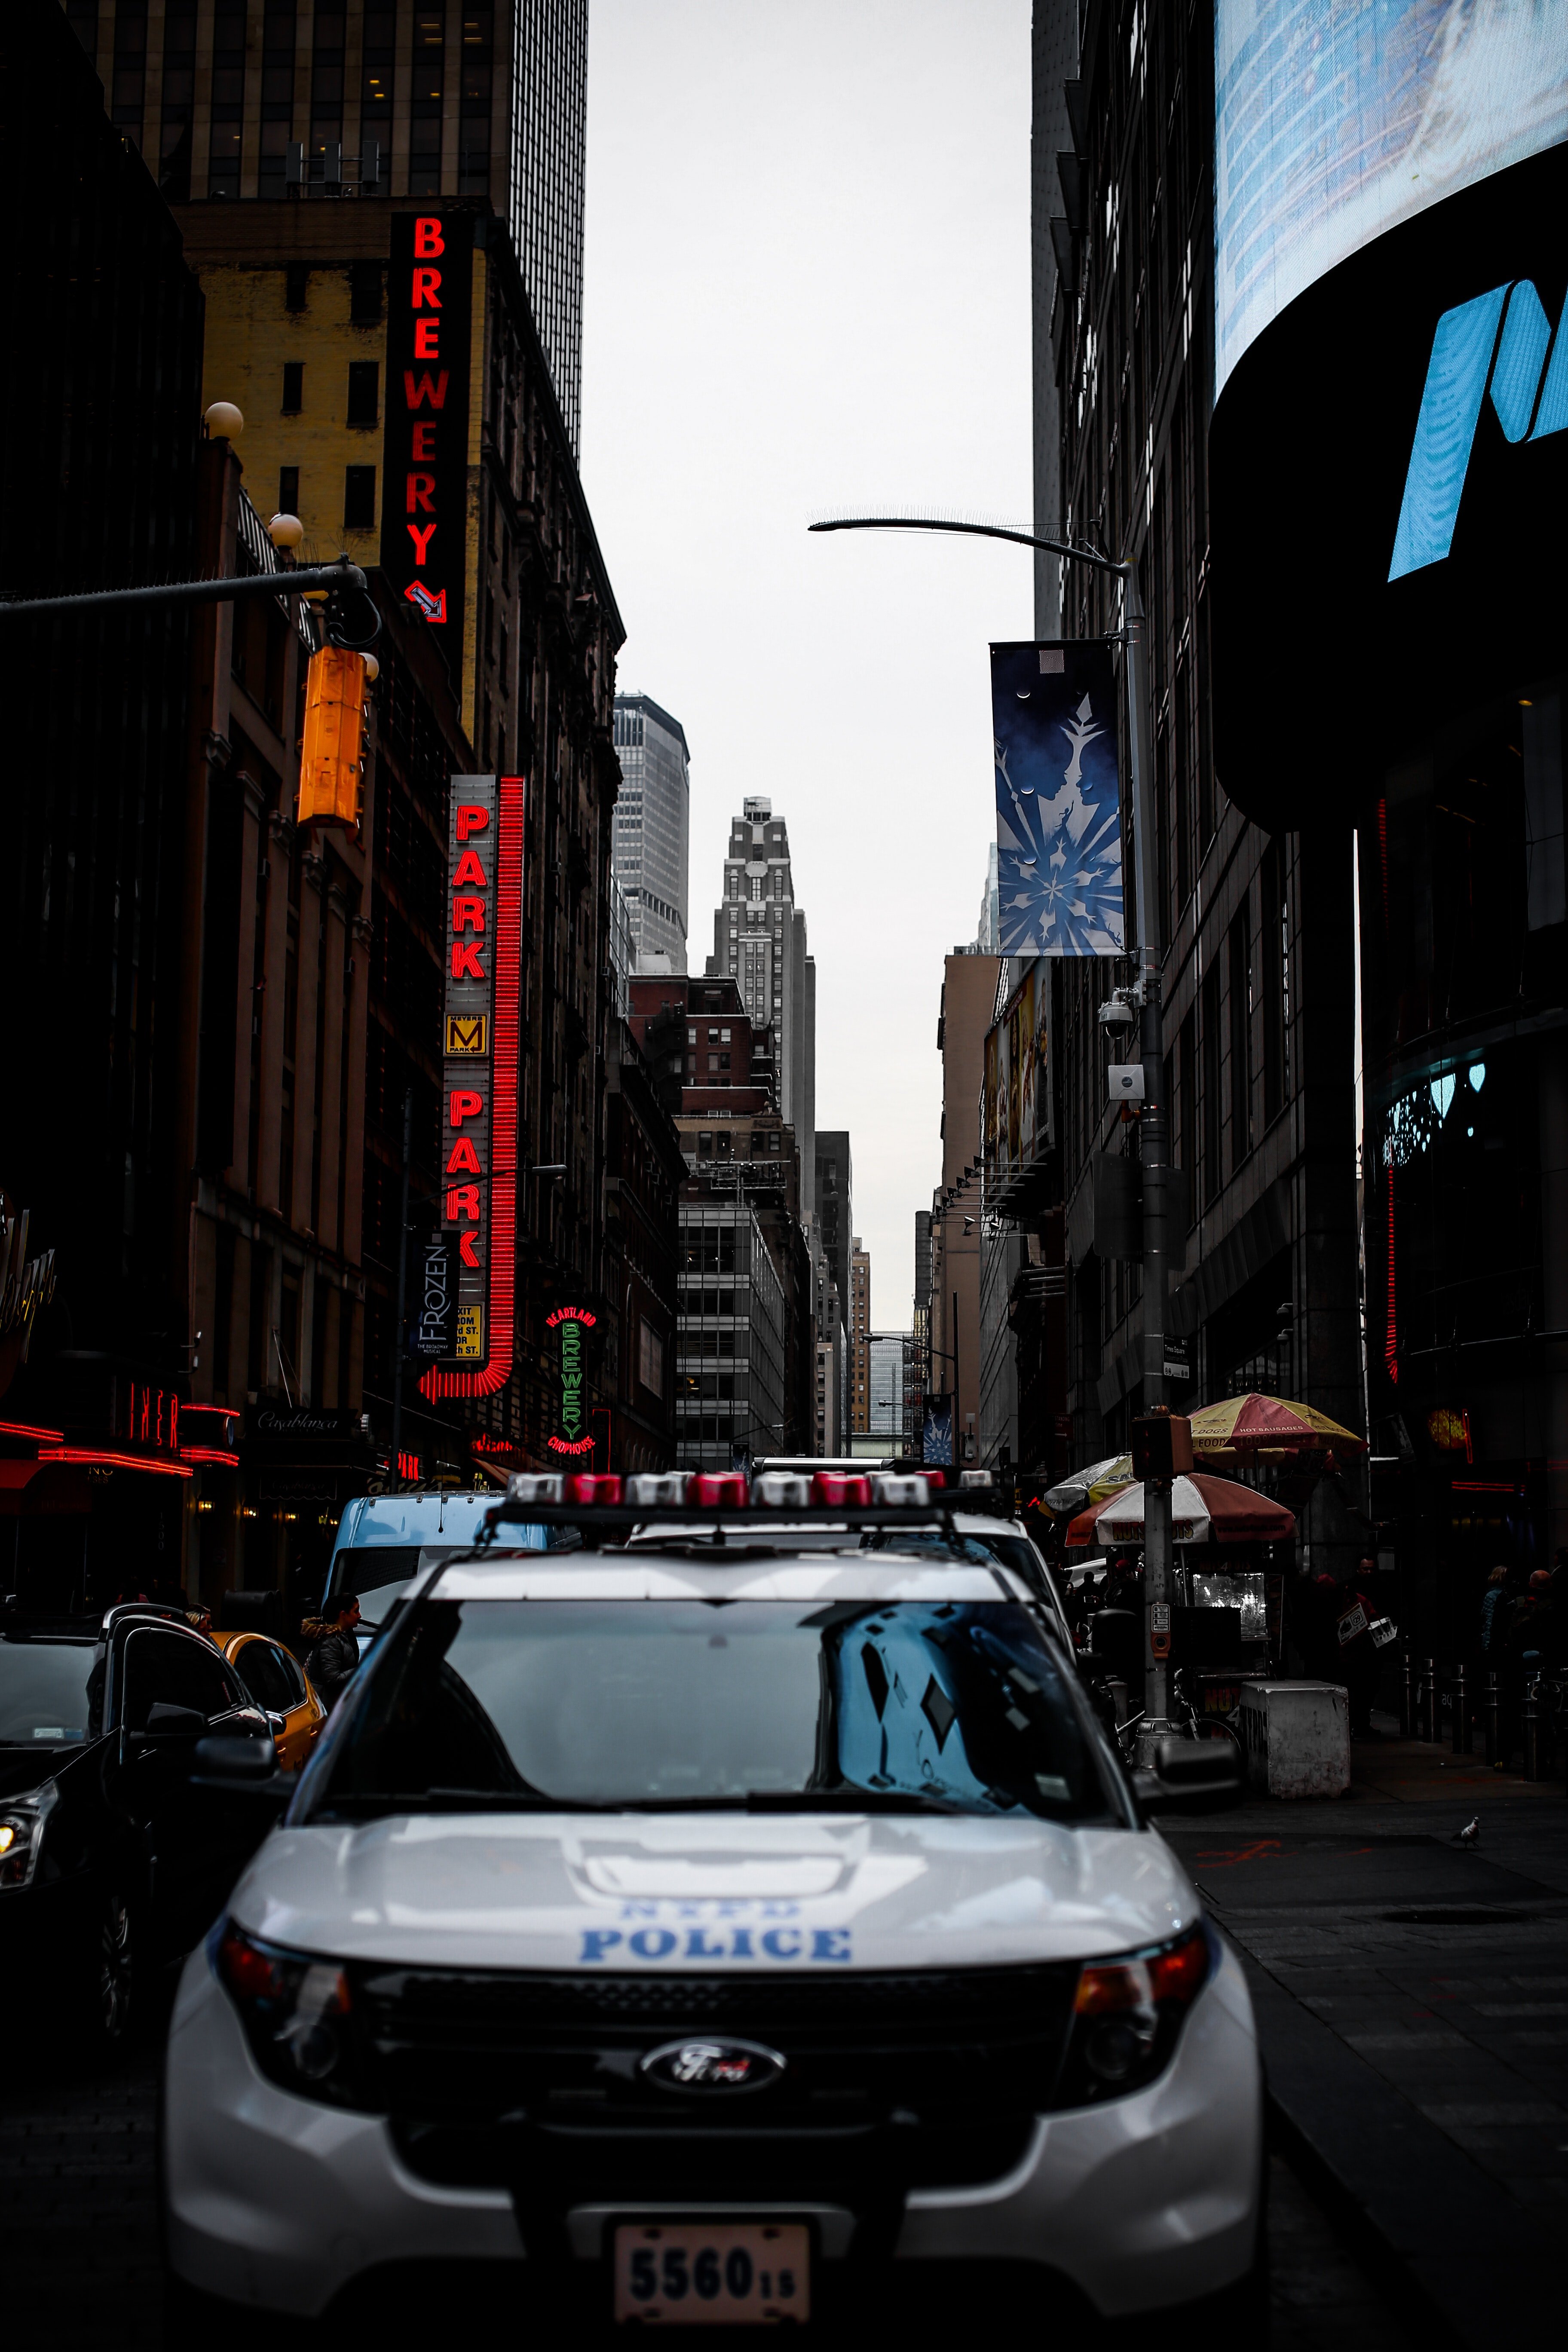 Pictured - A police vehicle in the city | Source: Pexels 